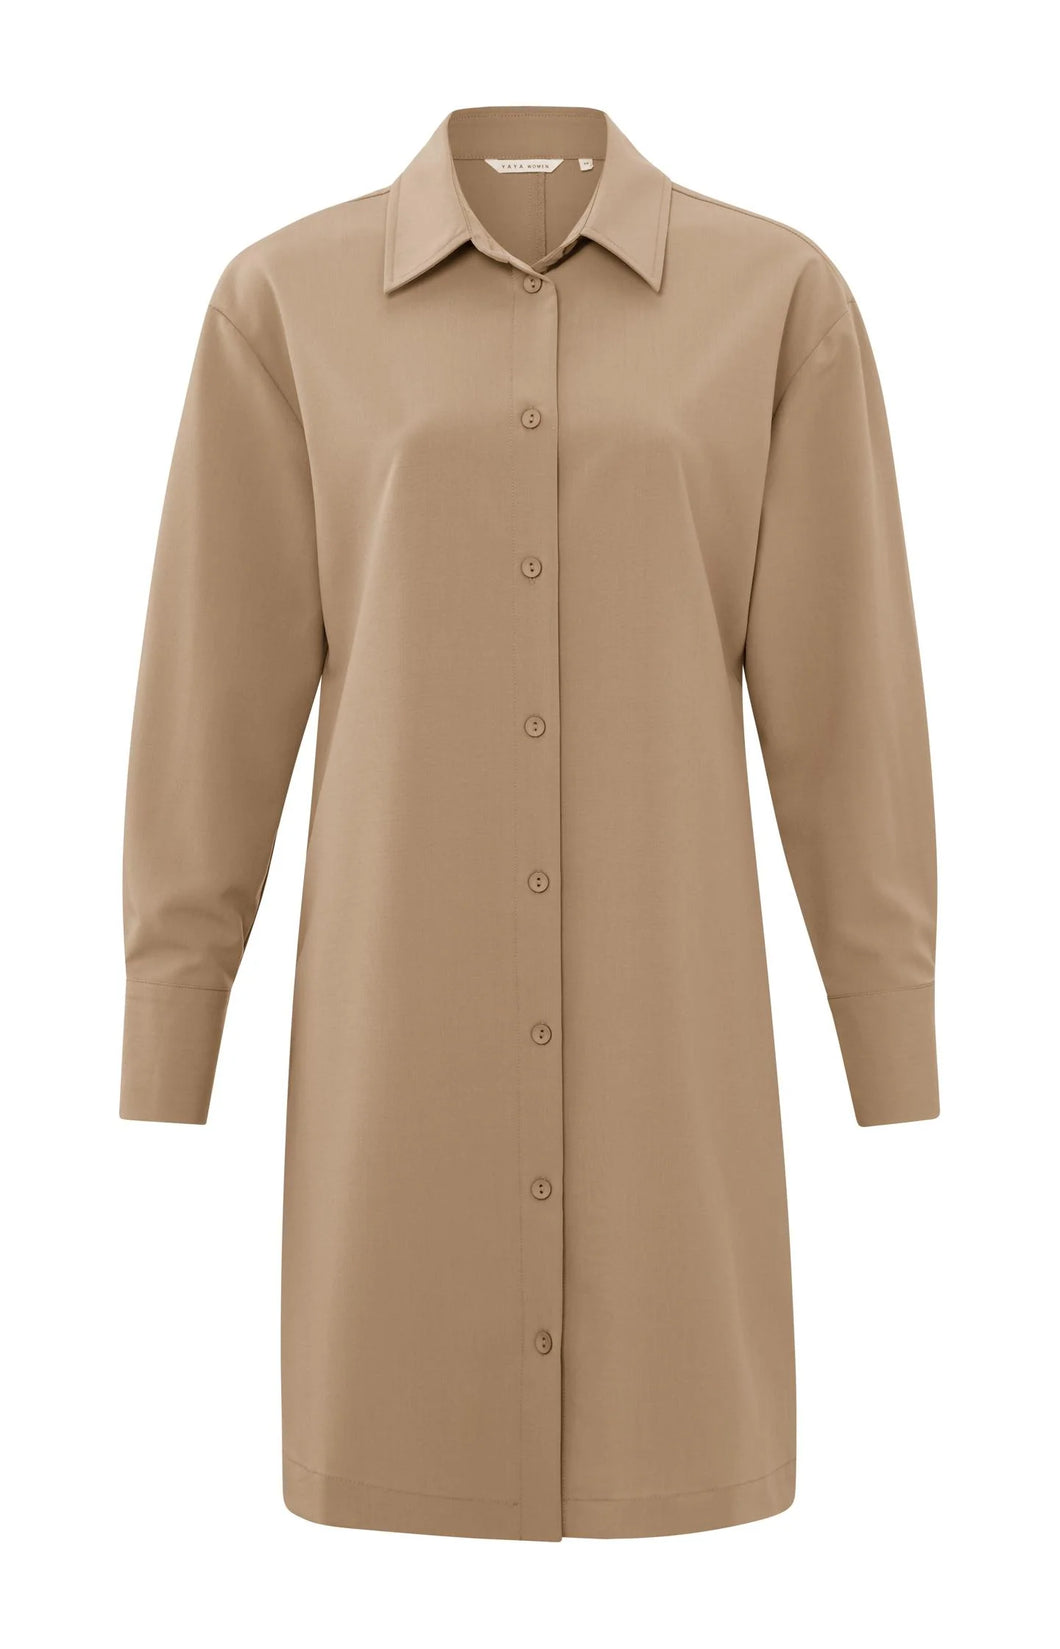 Fitted Blouse Dress - Tan